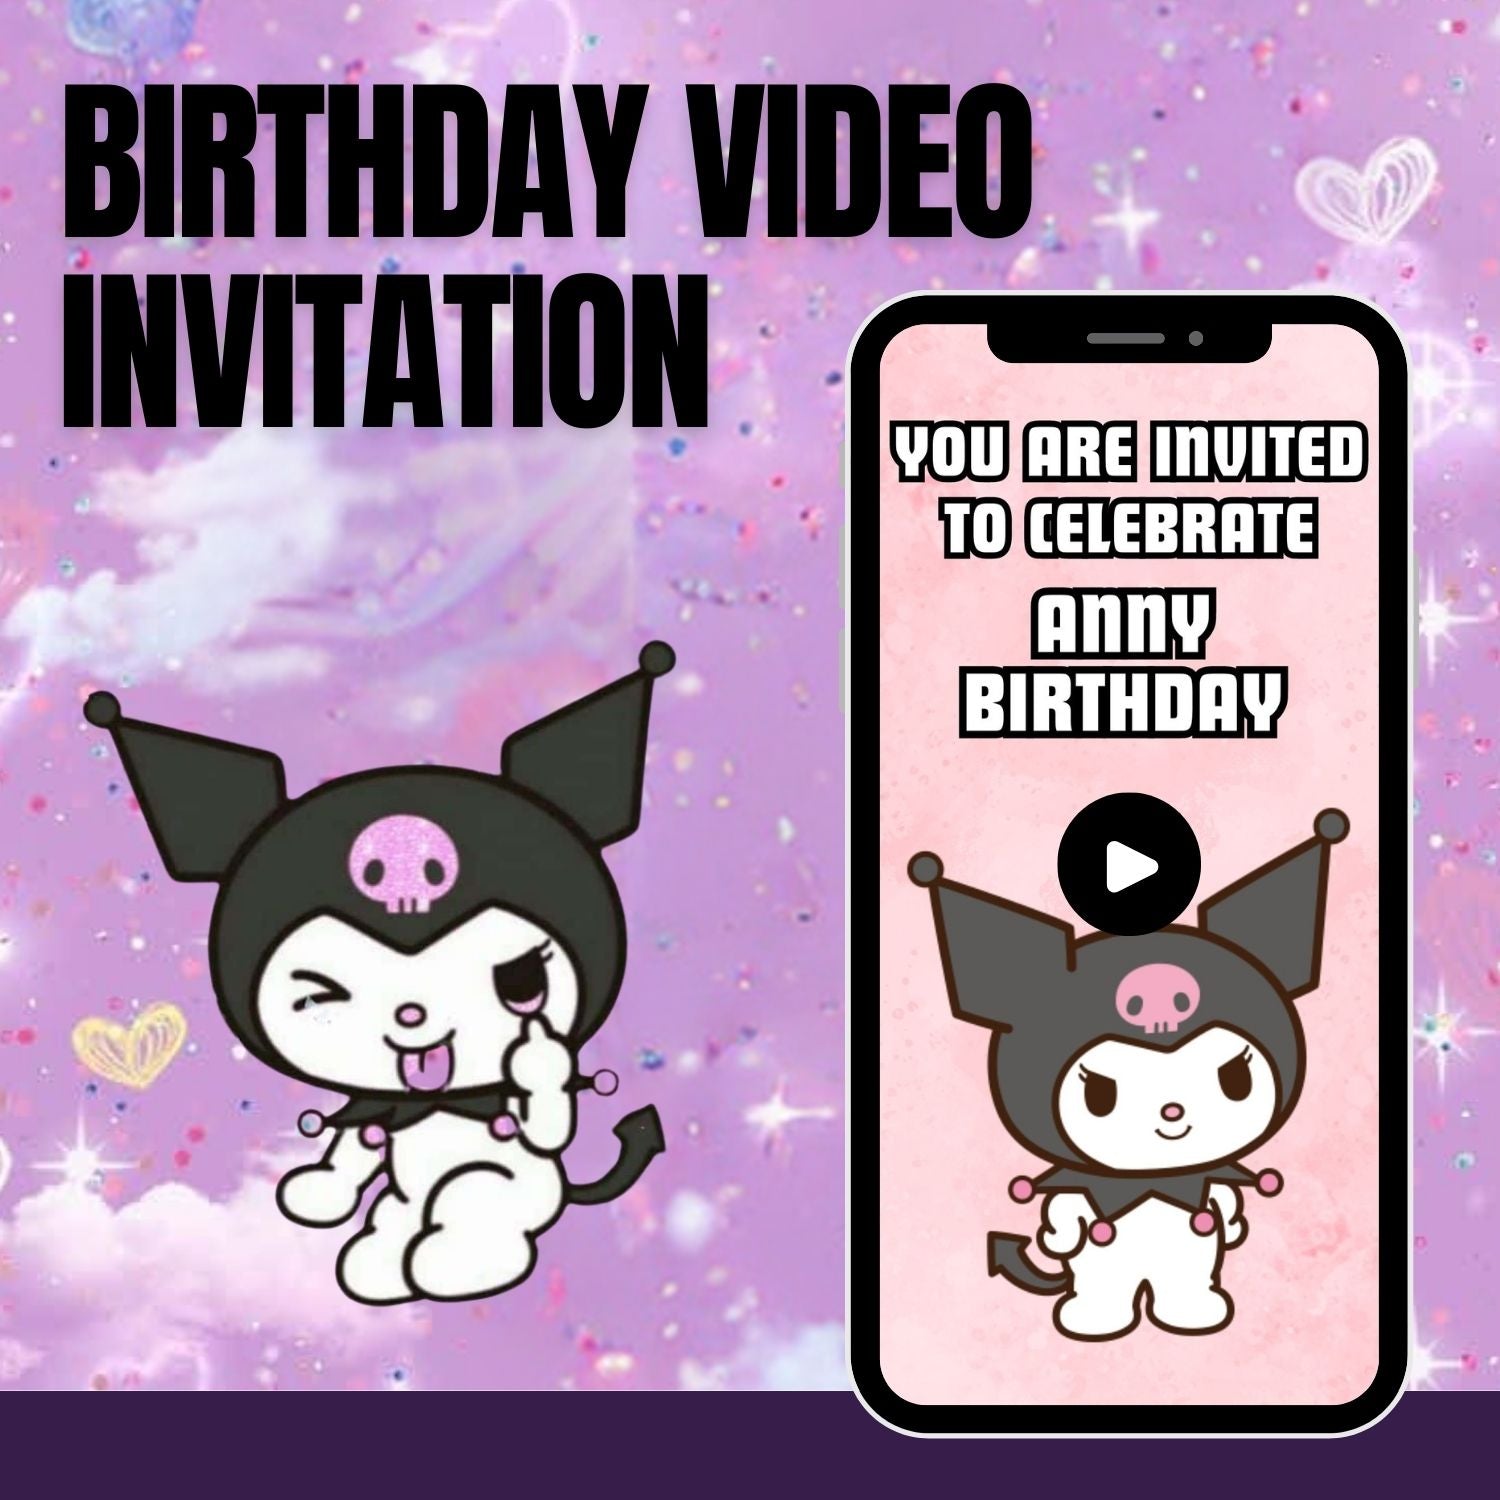 Kuromi Birthday Animated Video Invitation - Cute and Trendy Designs for a Memorable Celebration